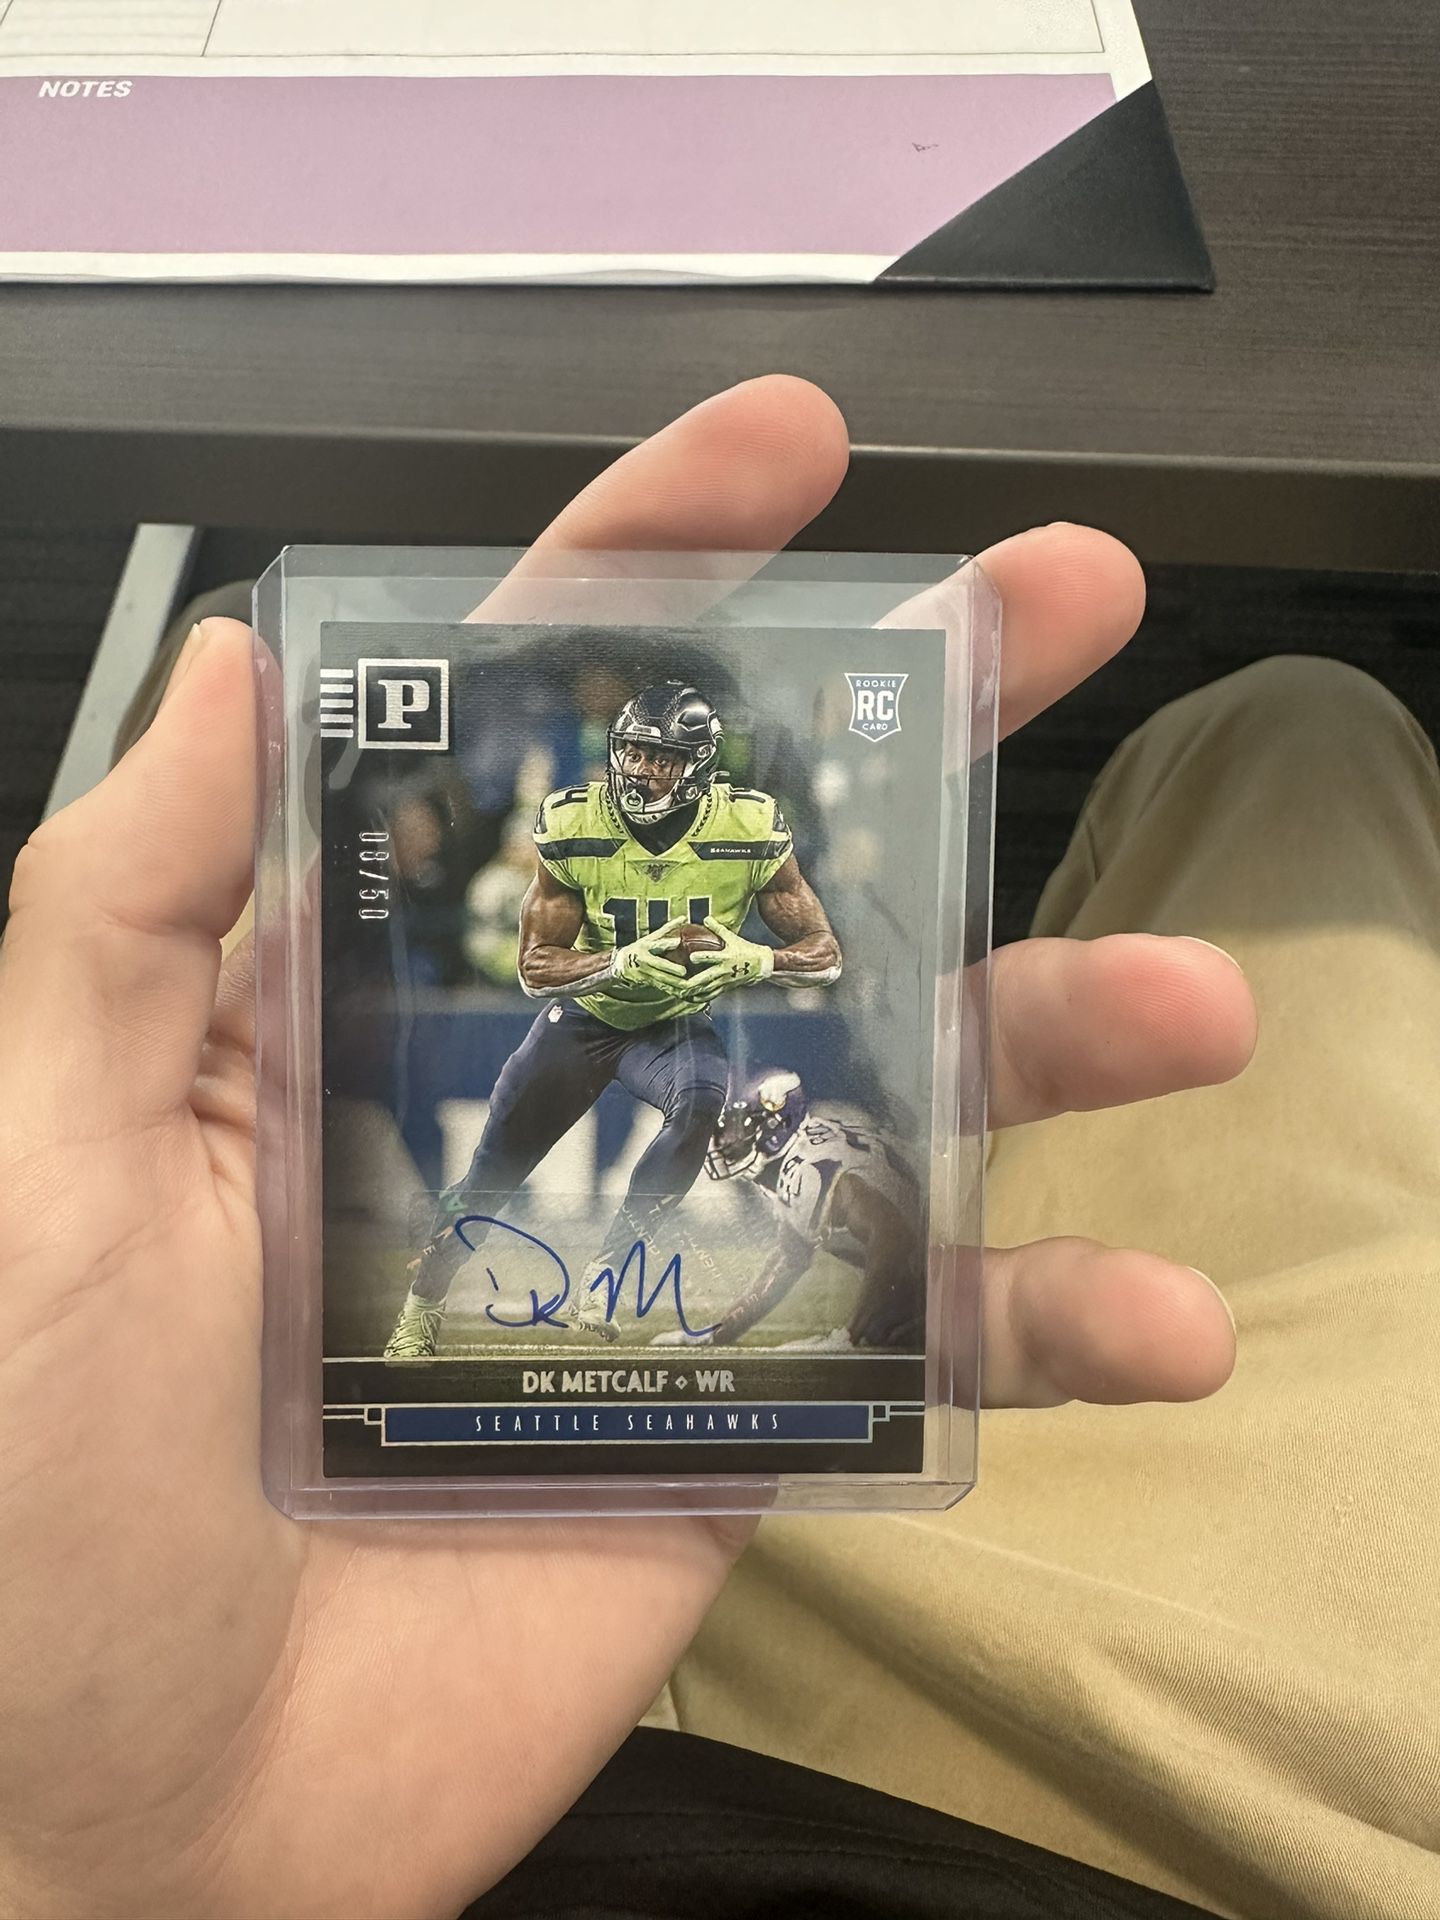 2019 Chronicles Seahawks Rookie DK Metcalf Rookie Auto /50